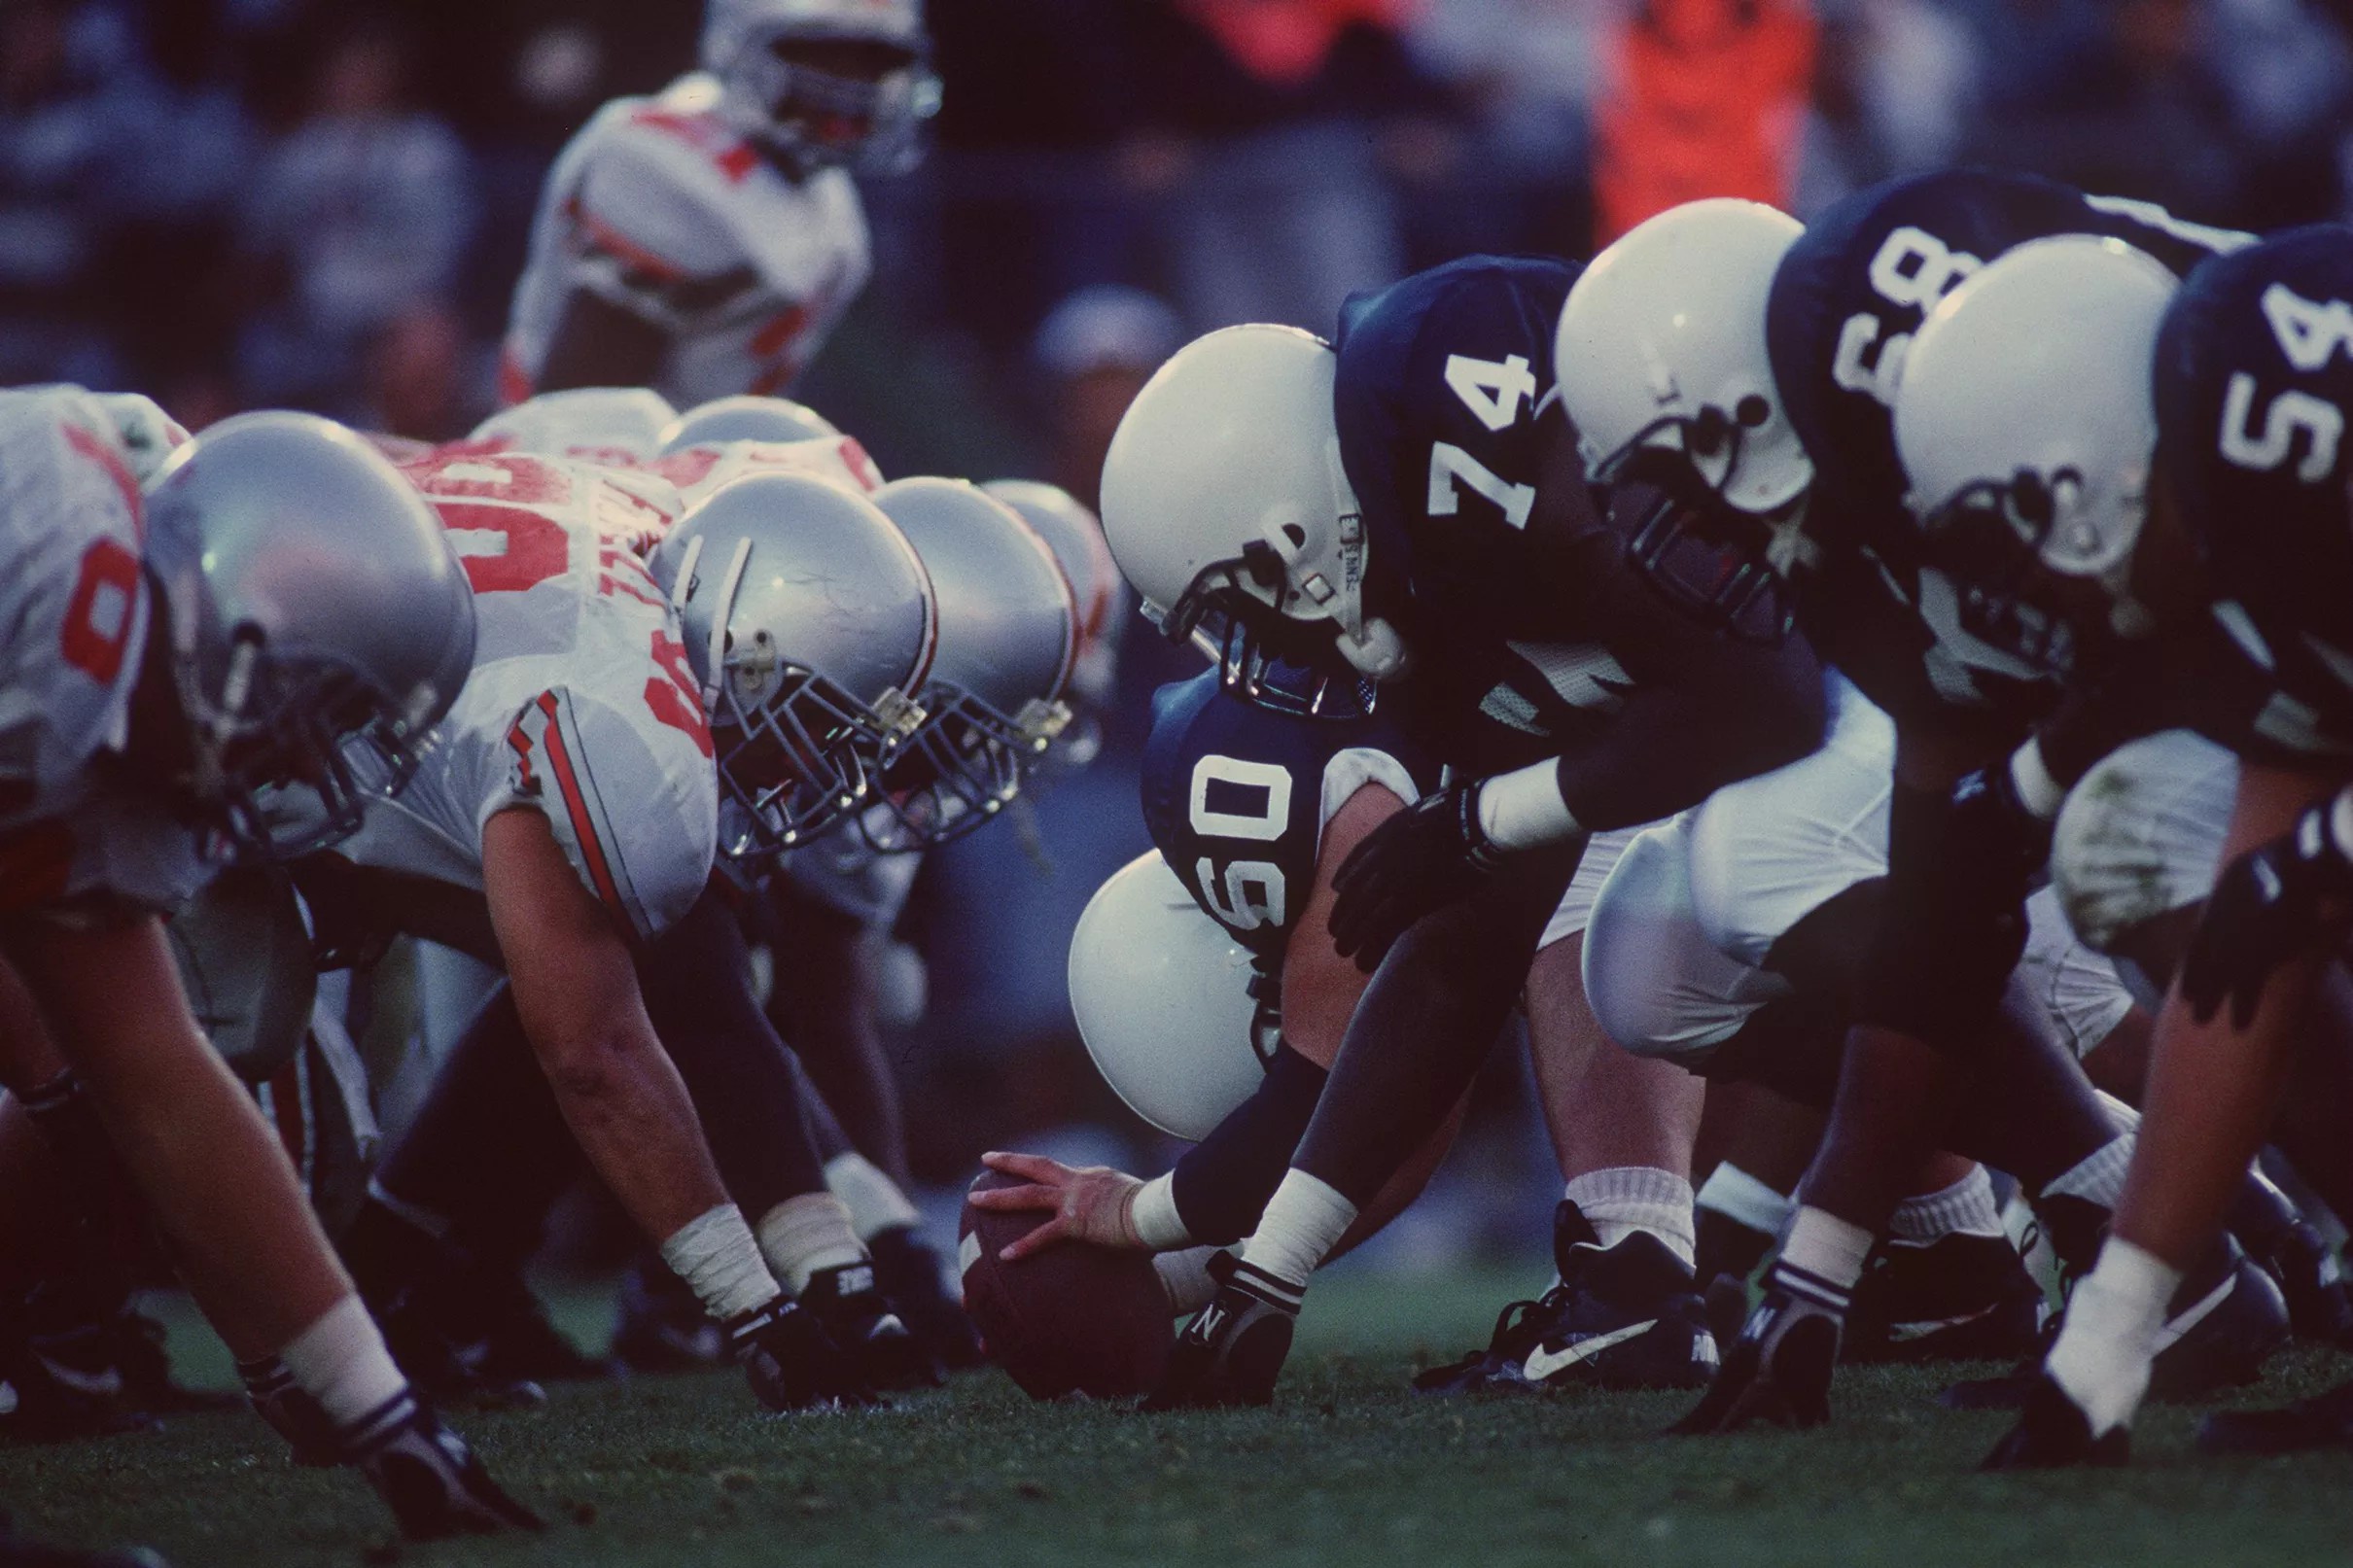 Rivalry or Not, Penn State-Ohio State is One of College Football’s